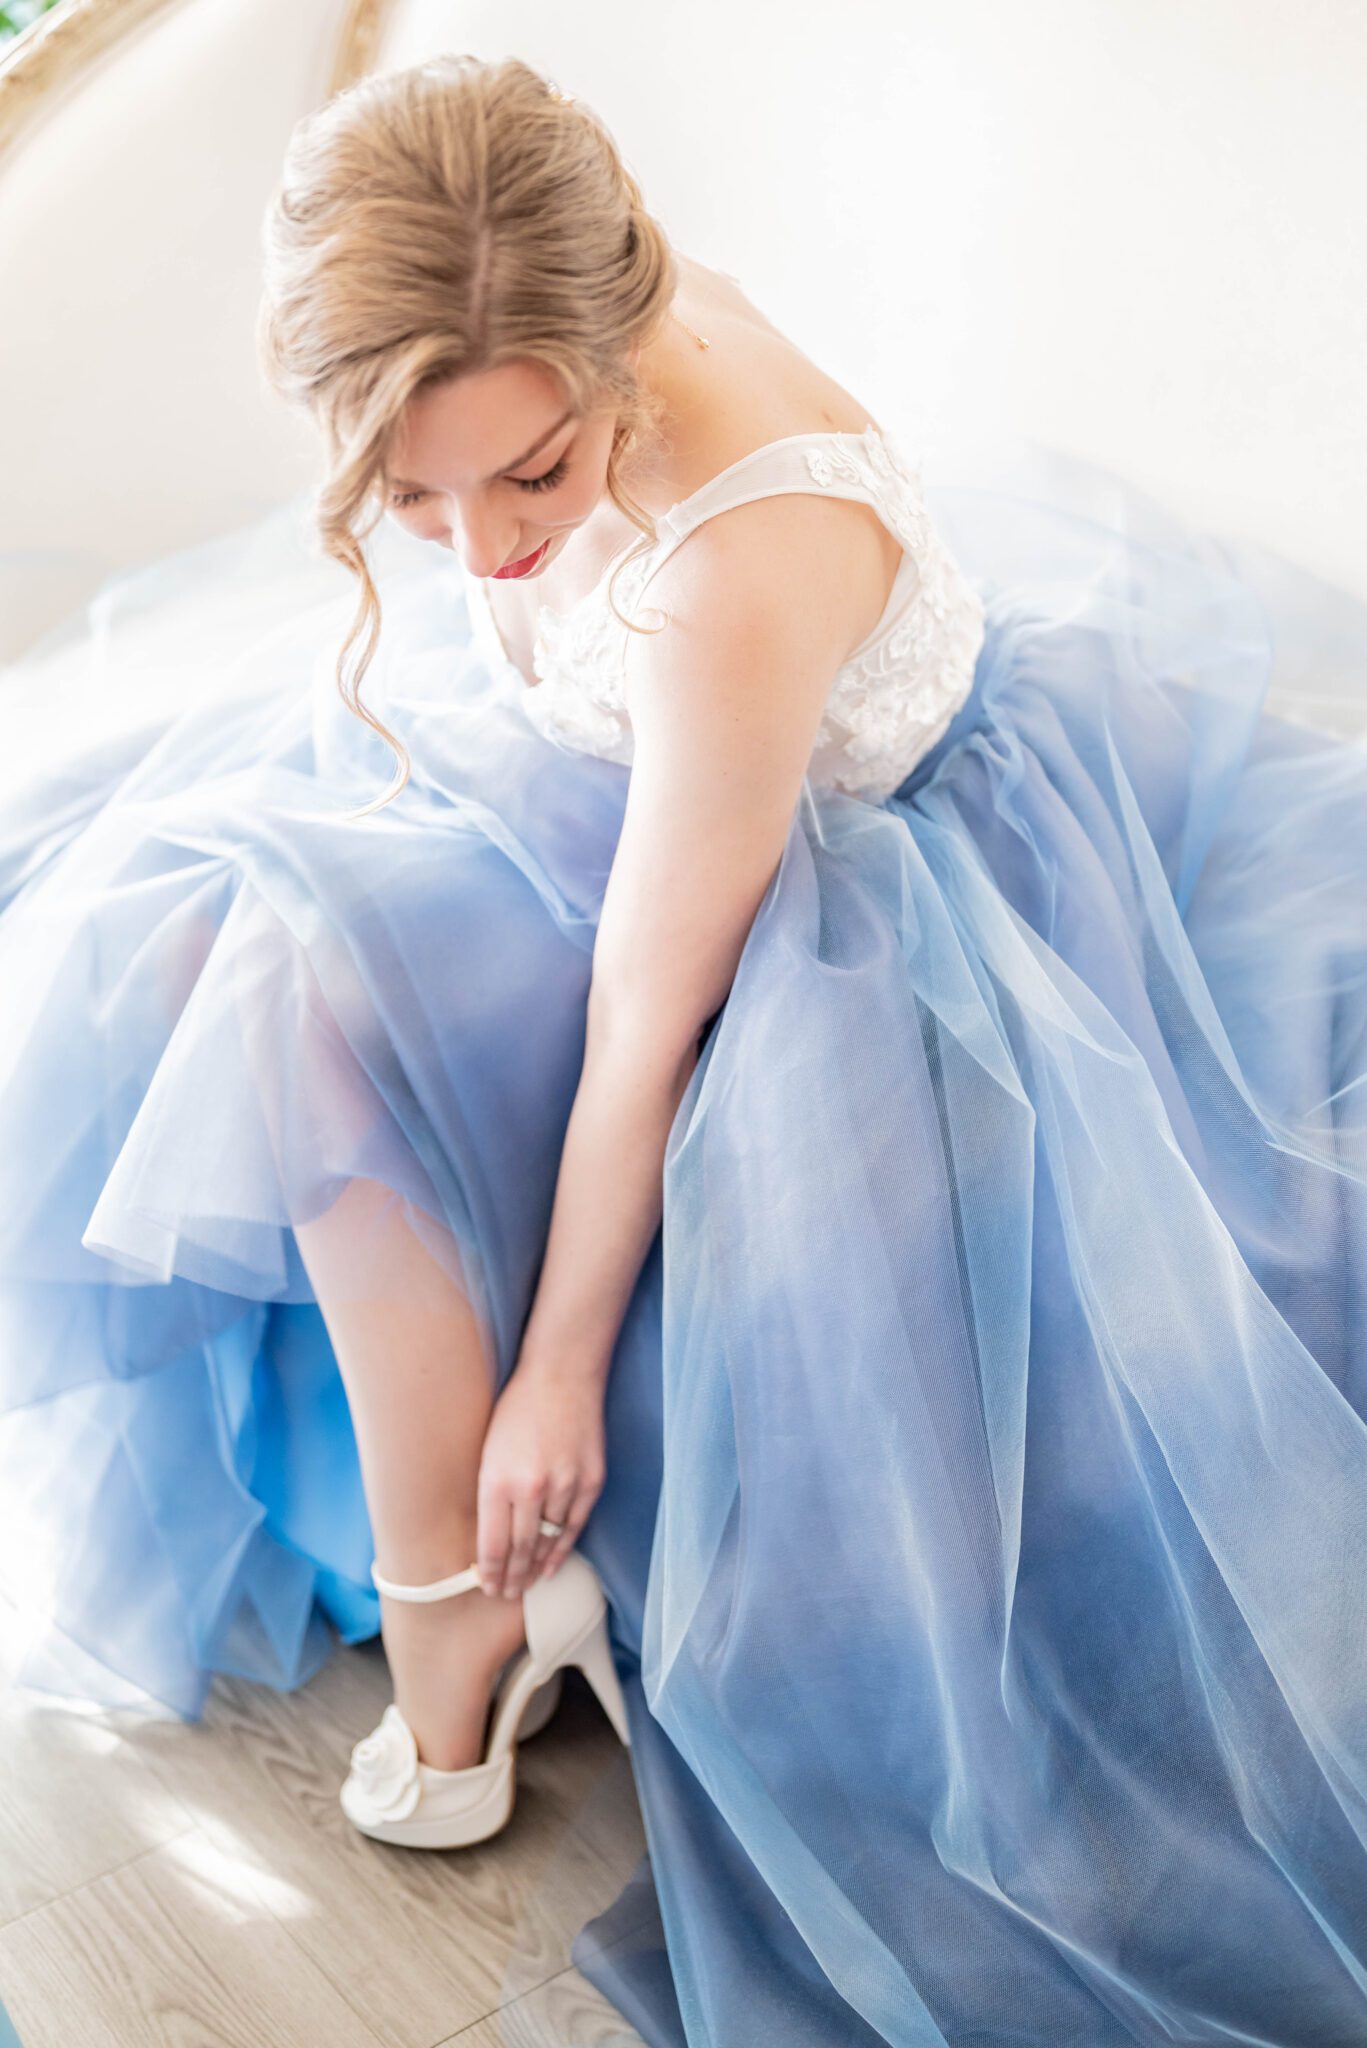 Bride putting on white bridal heels in getting ready photo, two-toned white lace and baby blue organza wedding dress inspiration by Catalina Del Angel Designs, romantic and feminine bridal fashion